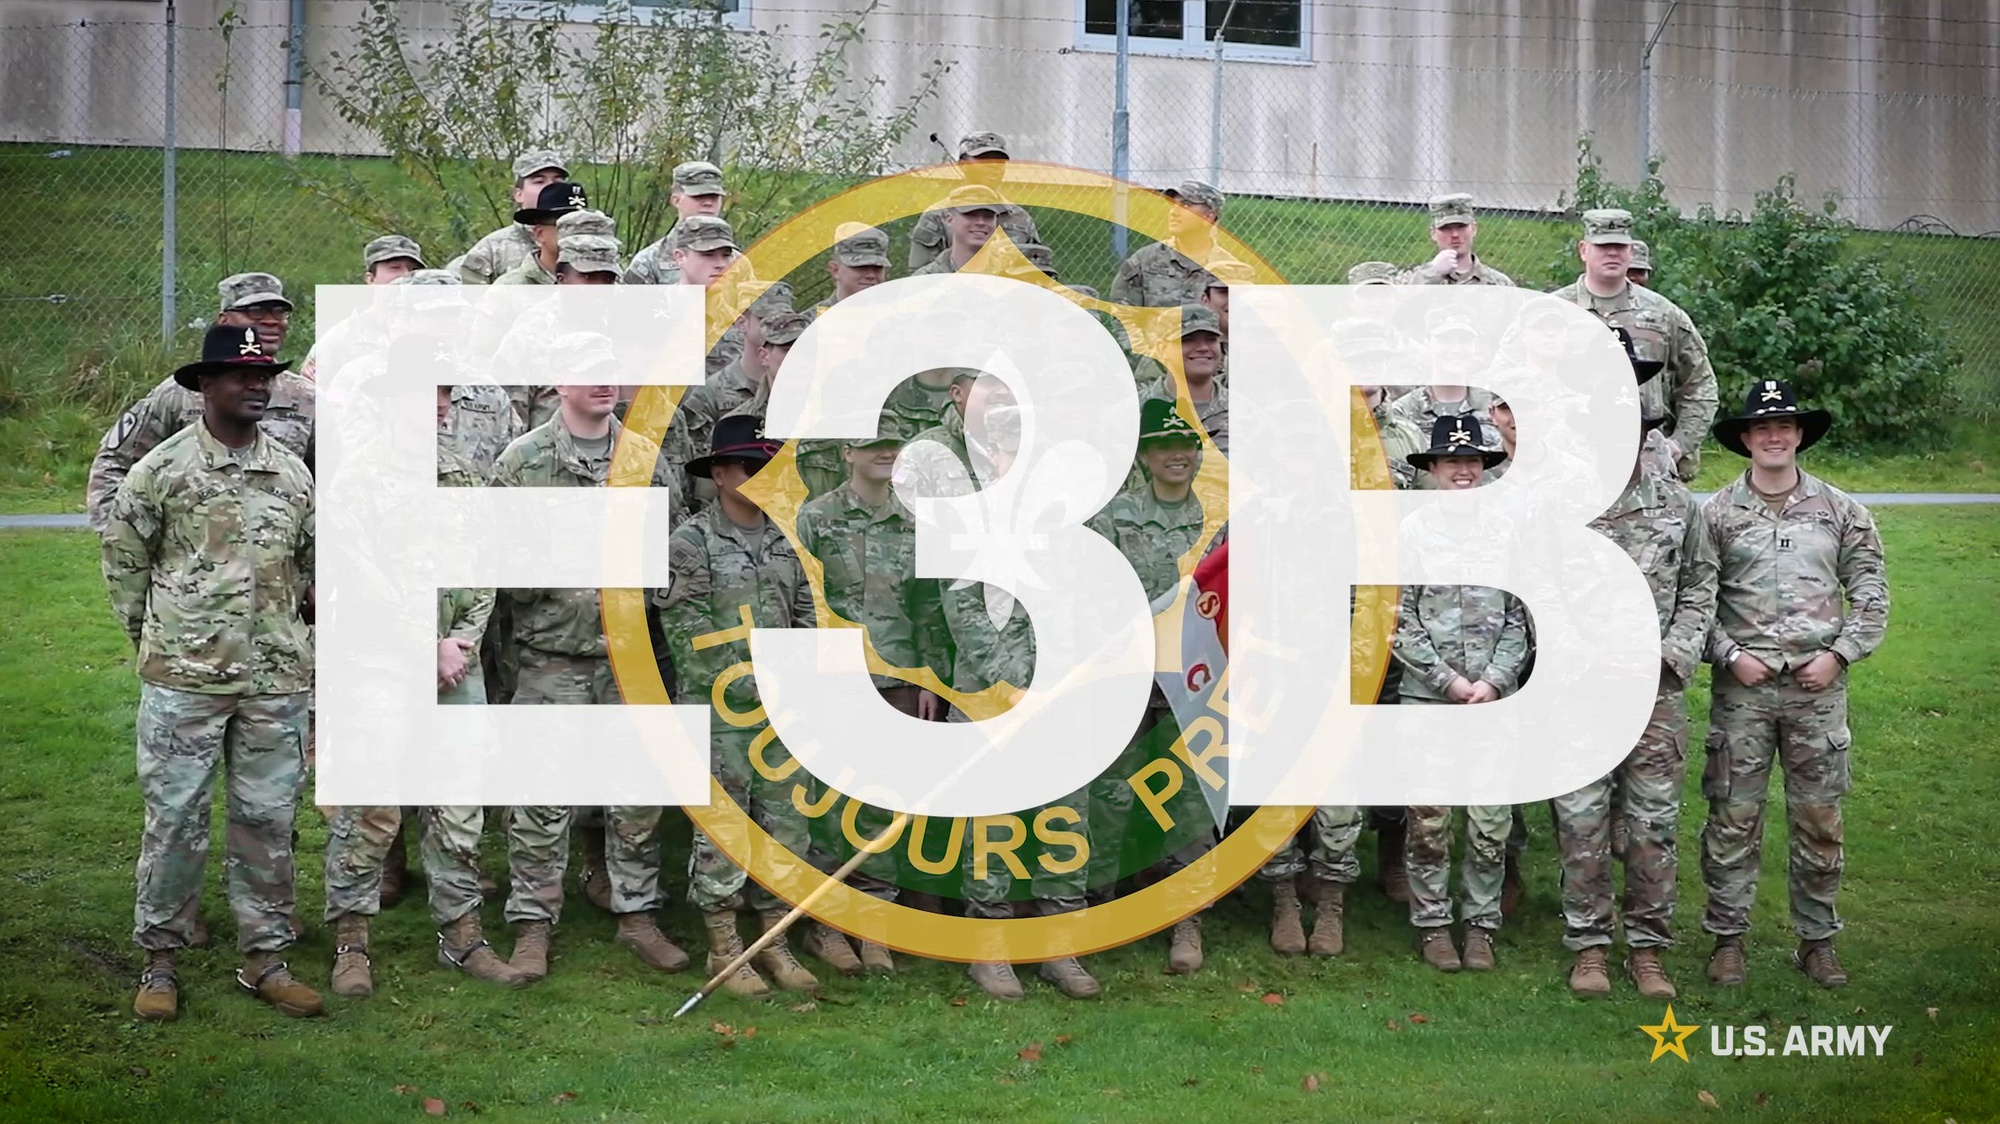 E3B is EIB, ESB and EFMB combined and test candidates' physical and mental abilities while executing critical individual tasks and training which improves the armed force's ability to respond more effectively and efficiently which increases readiness. (U.S. Army Reserve video by Spc. Cameron Hershberger)